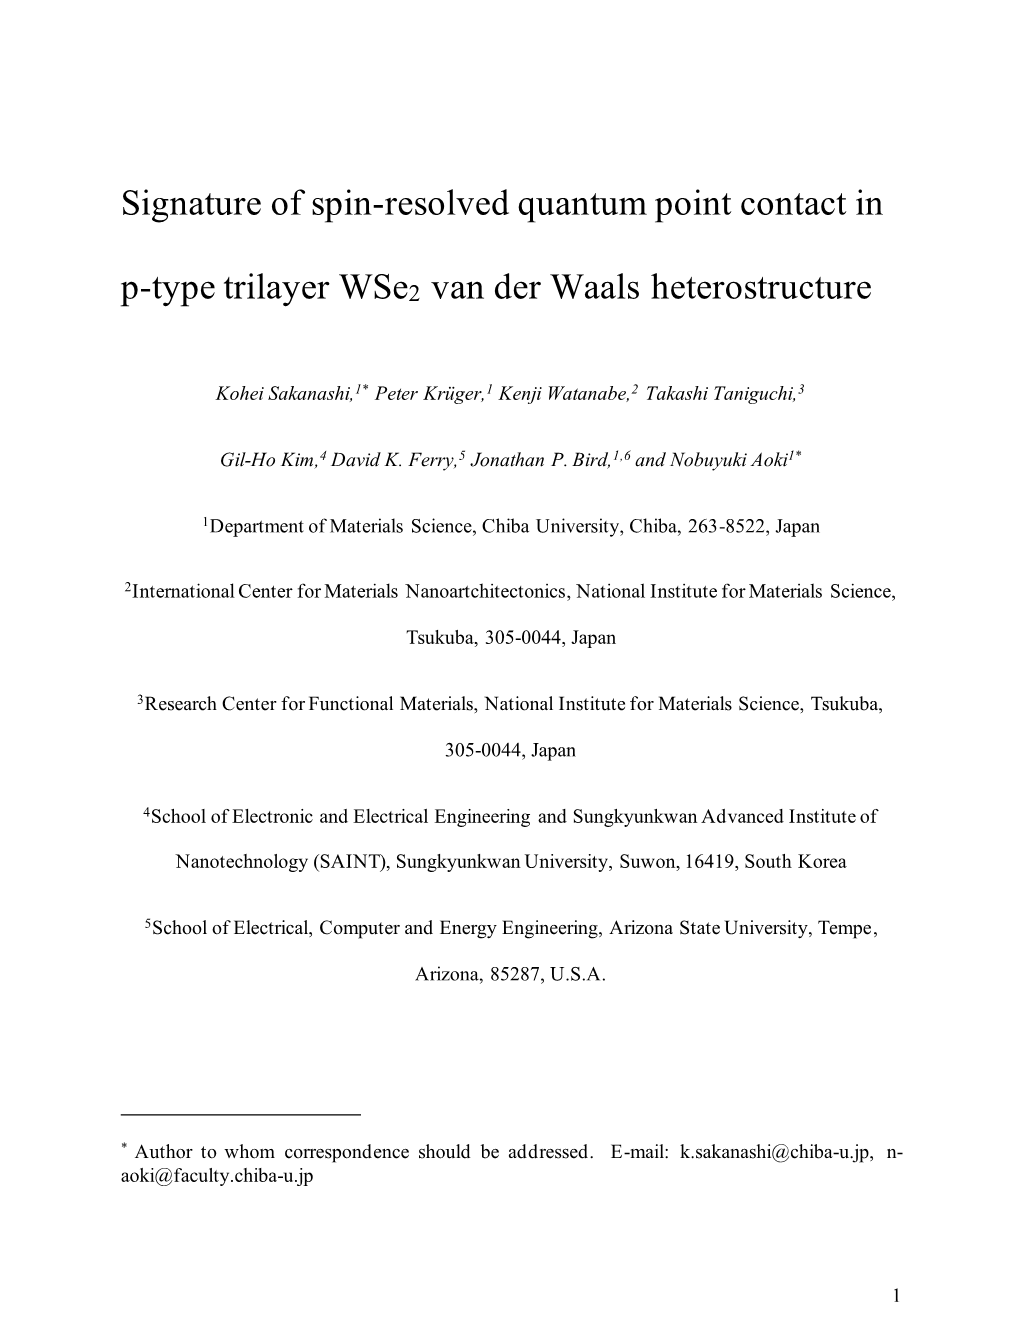 Signature of Spin-Resolved Quantum Point Contact in P-Type Trilayer Wse2 Van Der Waals Heterostructure